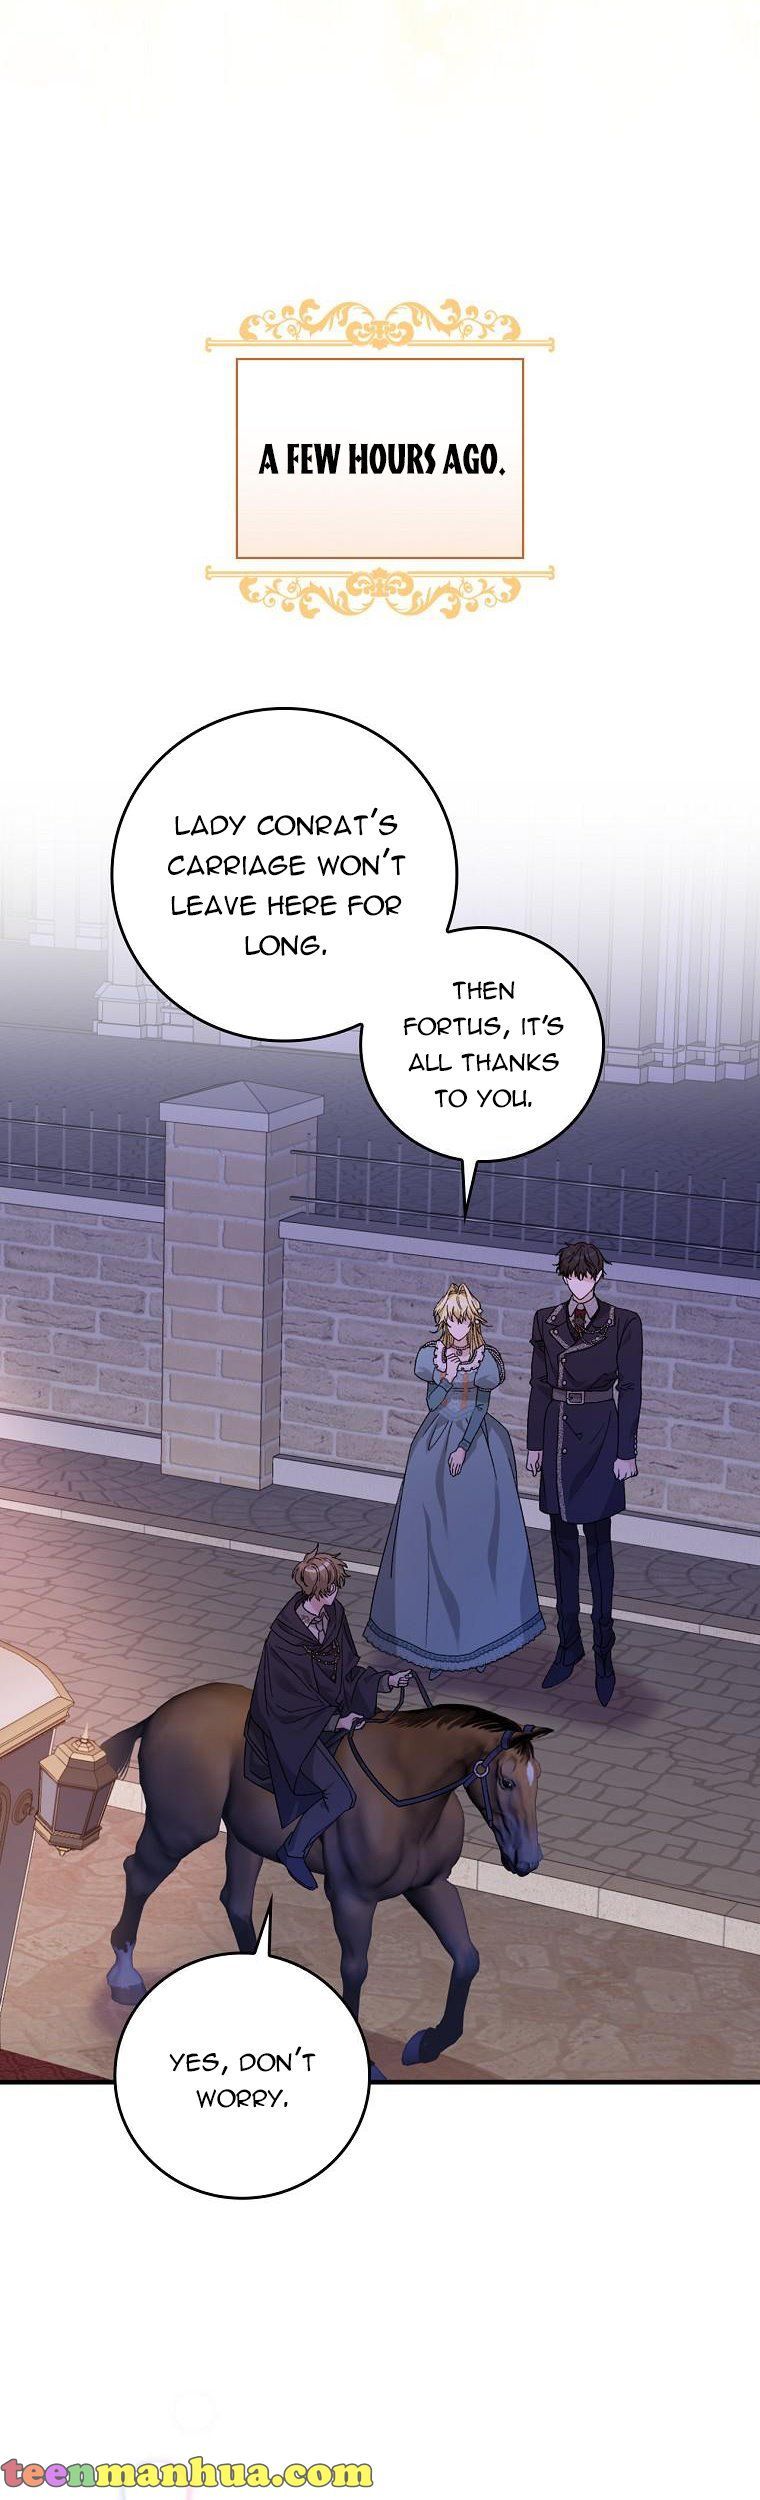 A Perfect Ending Plan of the Villain in a Fairy Tale chapter 44 - Page 2